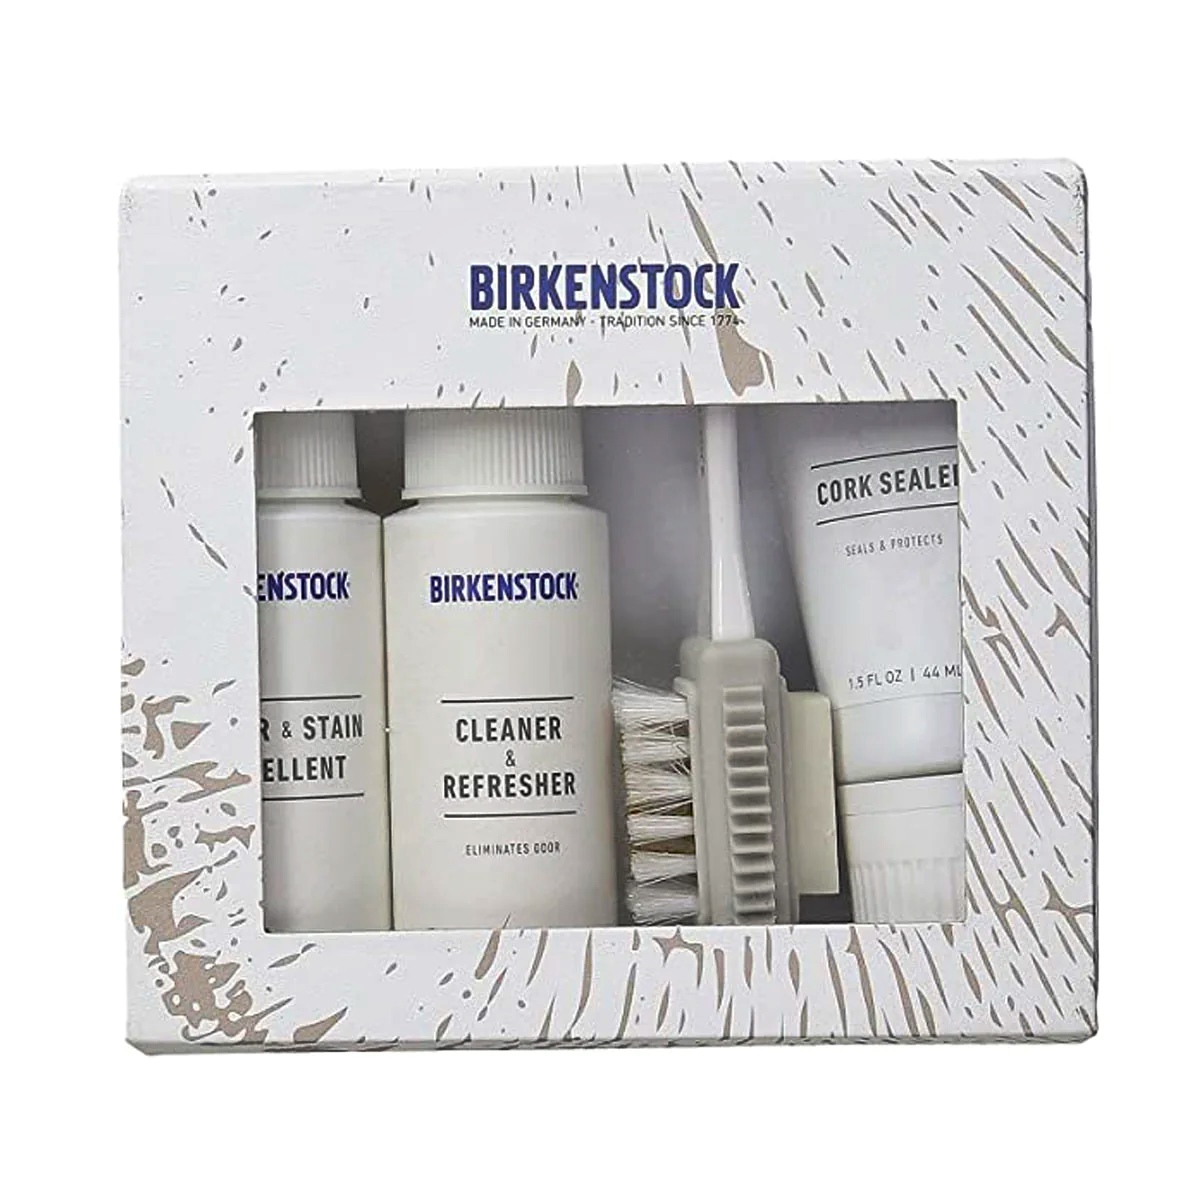 How To Use Birkenstock Cleaning Kit